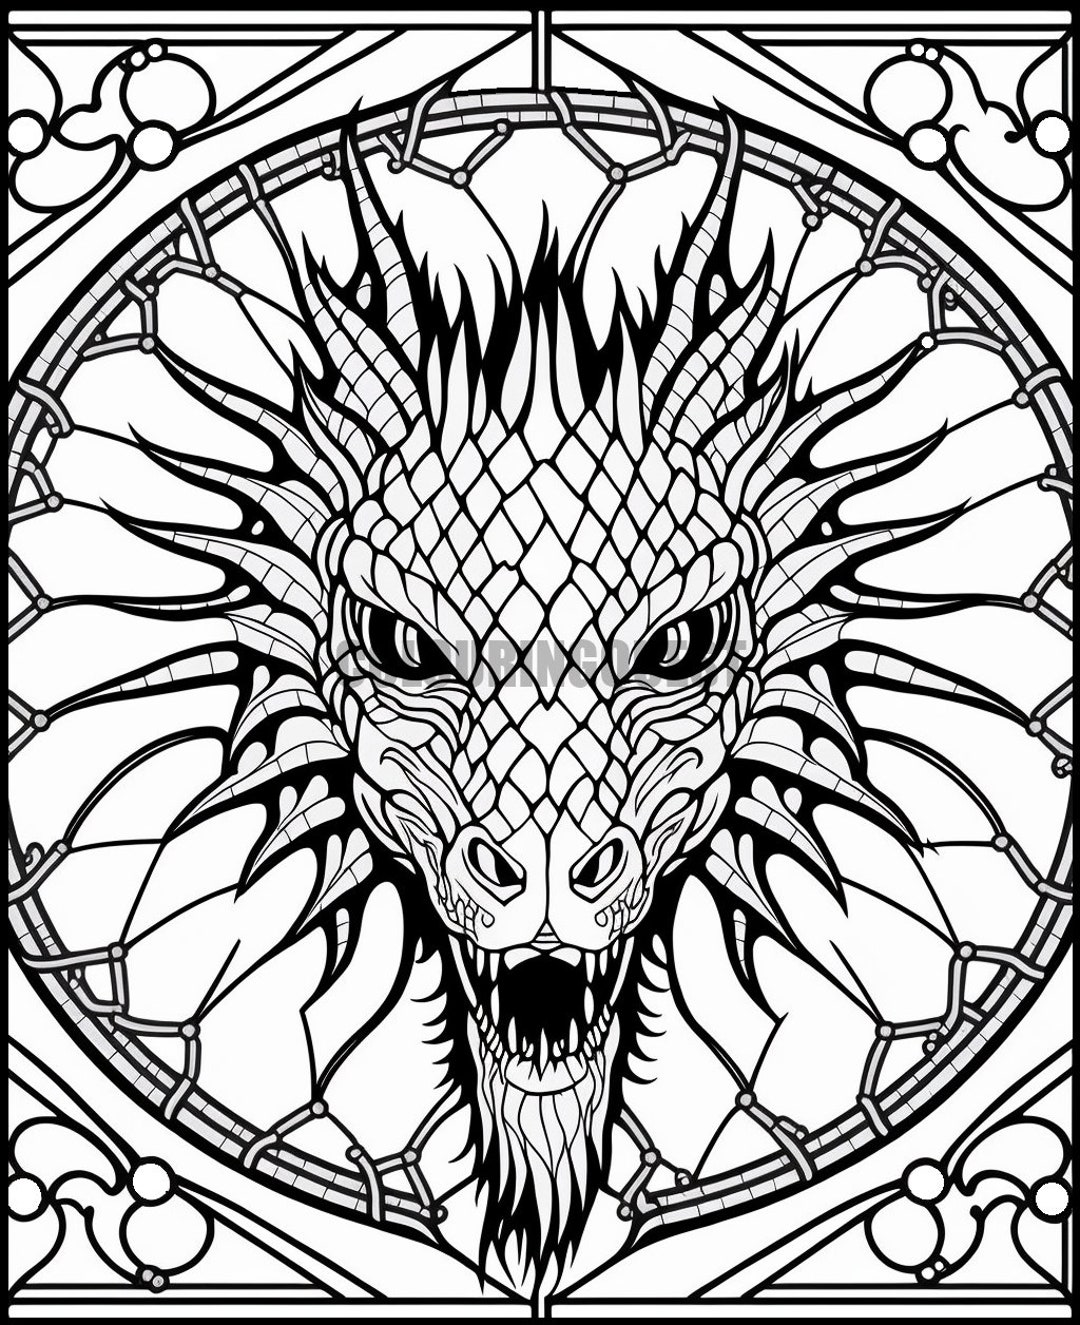 Dragon coloring sheet dragon stained glass printable adult coloring page